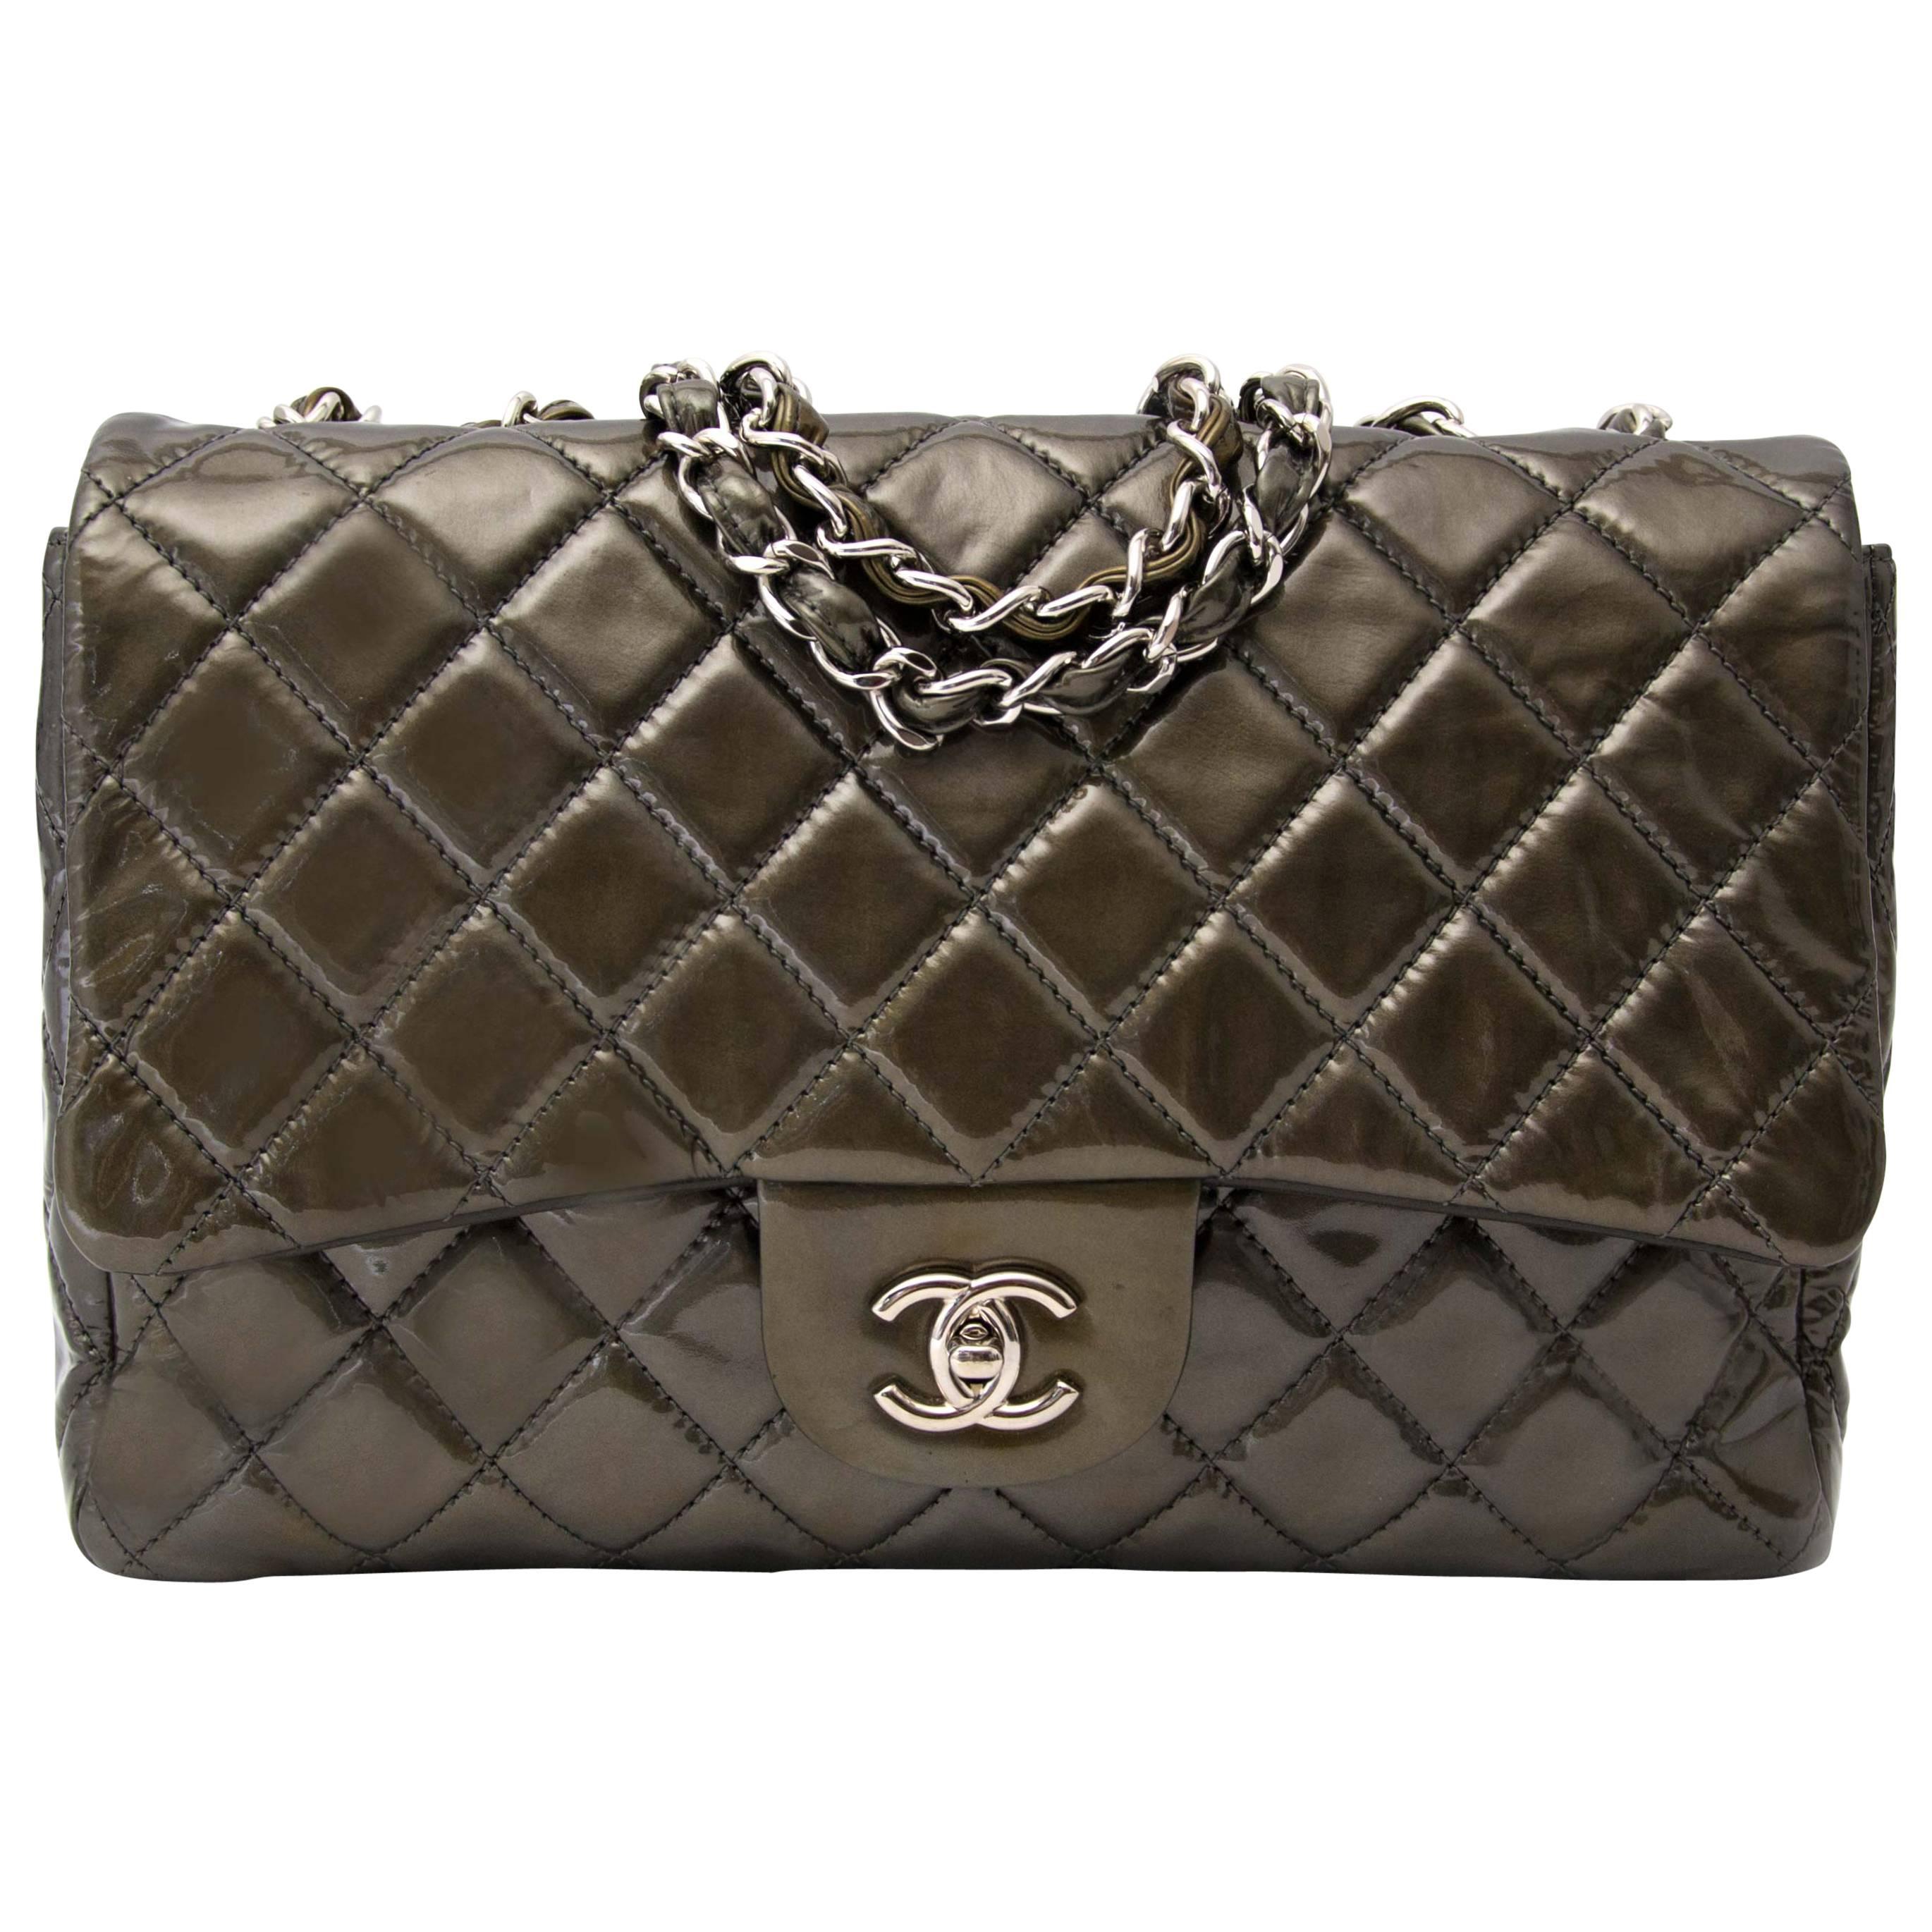 Chanel Patent Leather Olive Single Flap Bag 